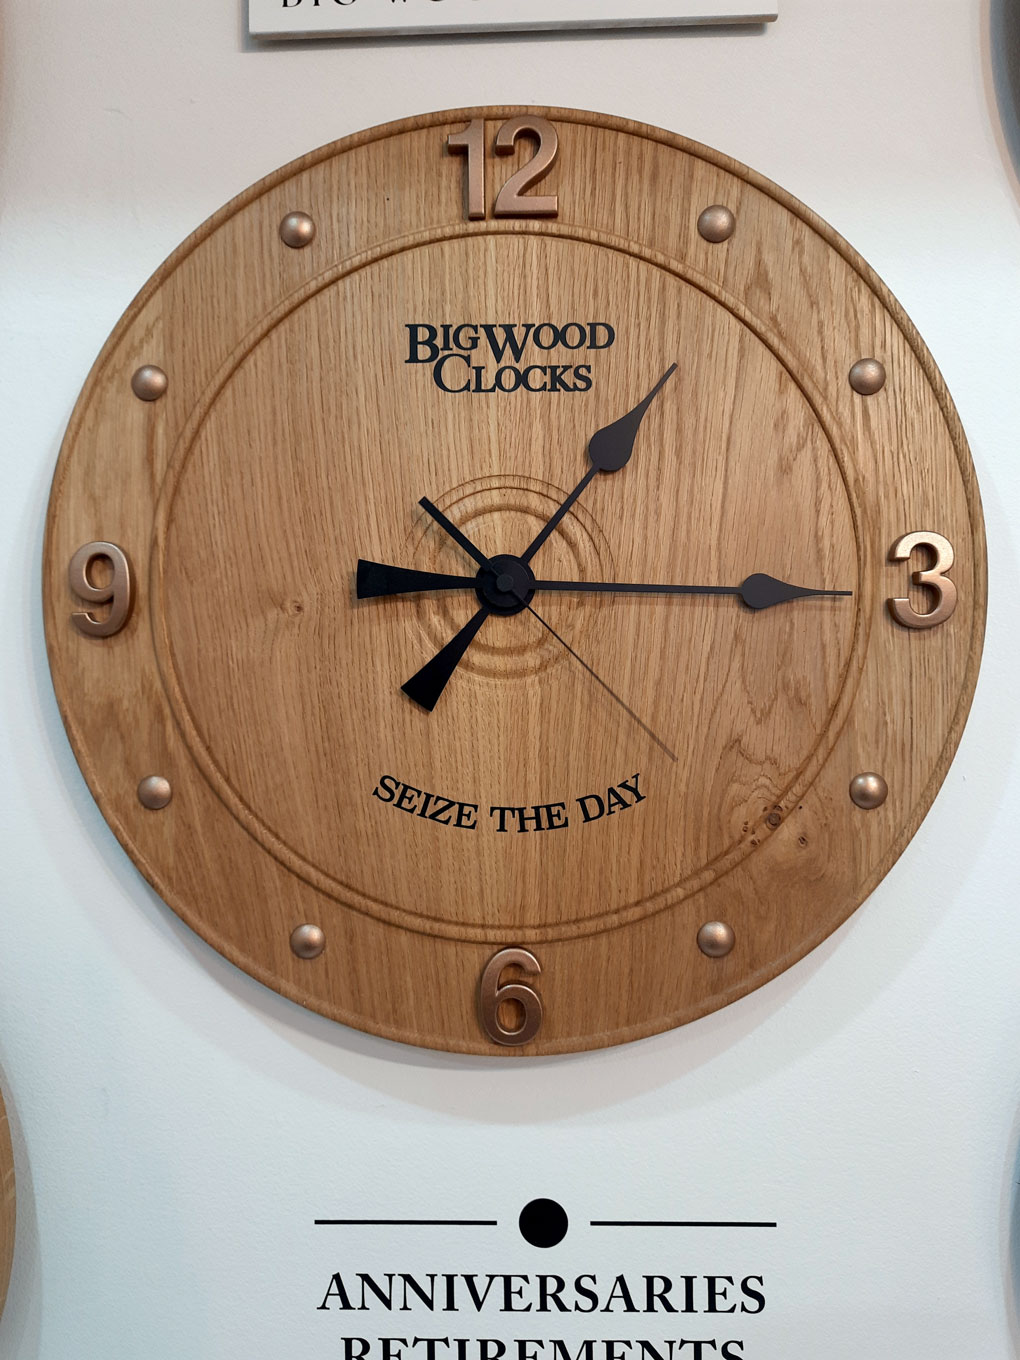 Wood turned Bigwood clock with bronze dial by Keithturnings